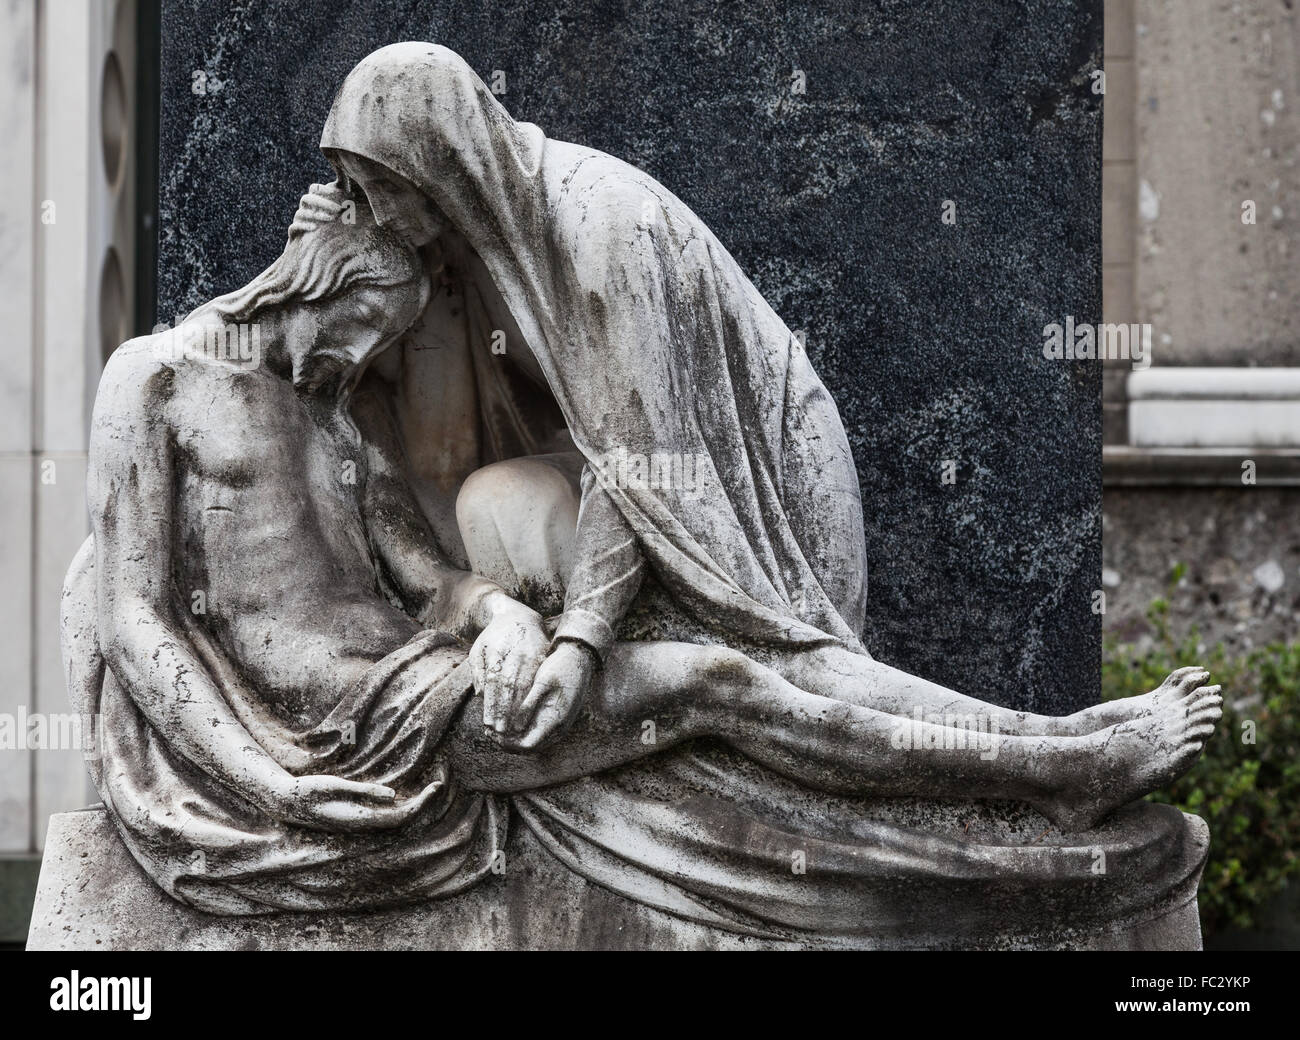 Old Cemetery statue Stock Photo - Alamy